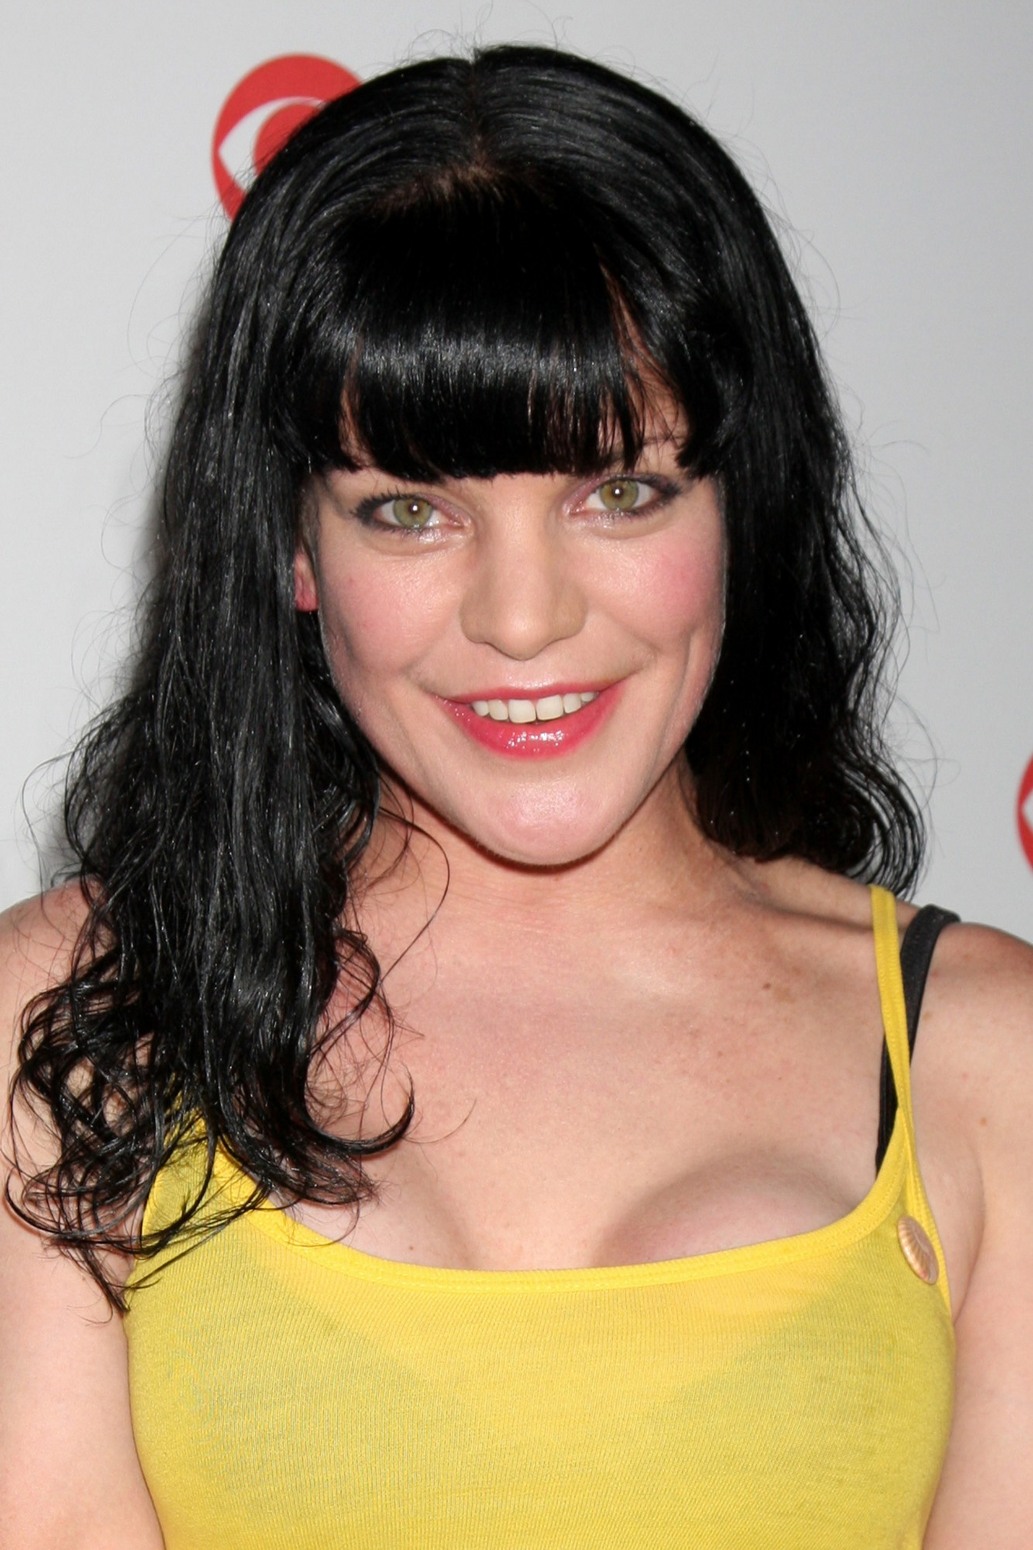 Pauley Perrette photo gallery high quality pics of Pauley Perrette